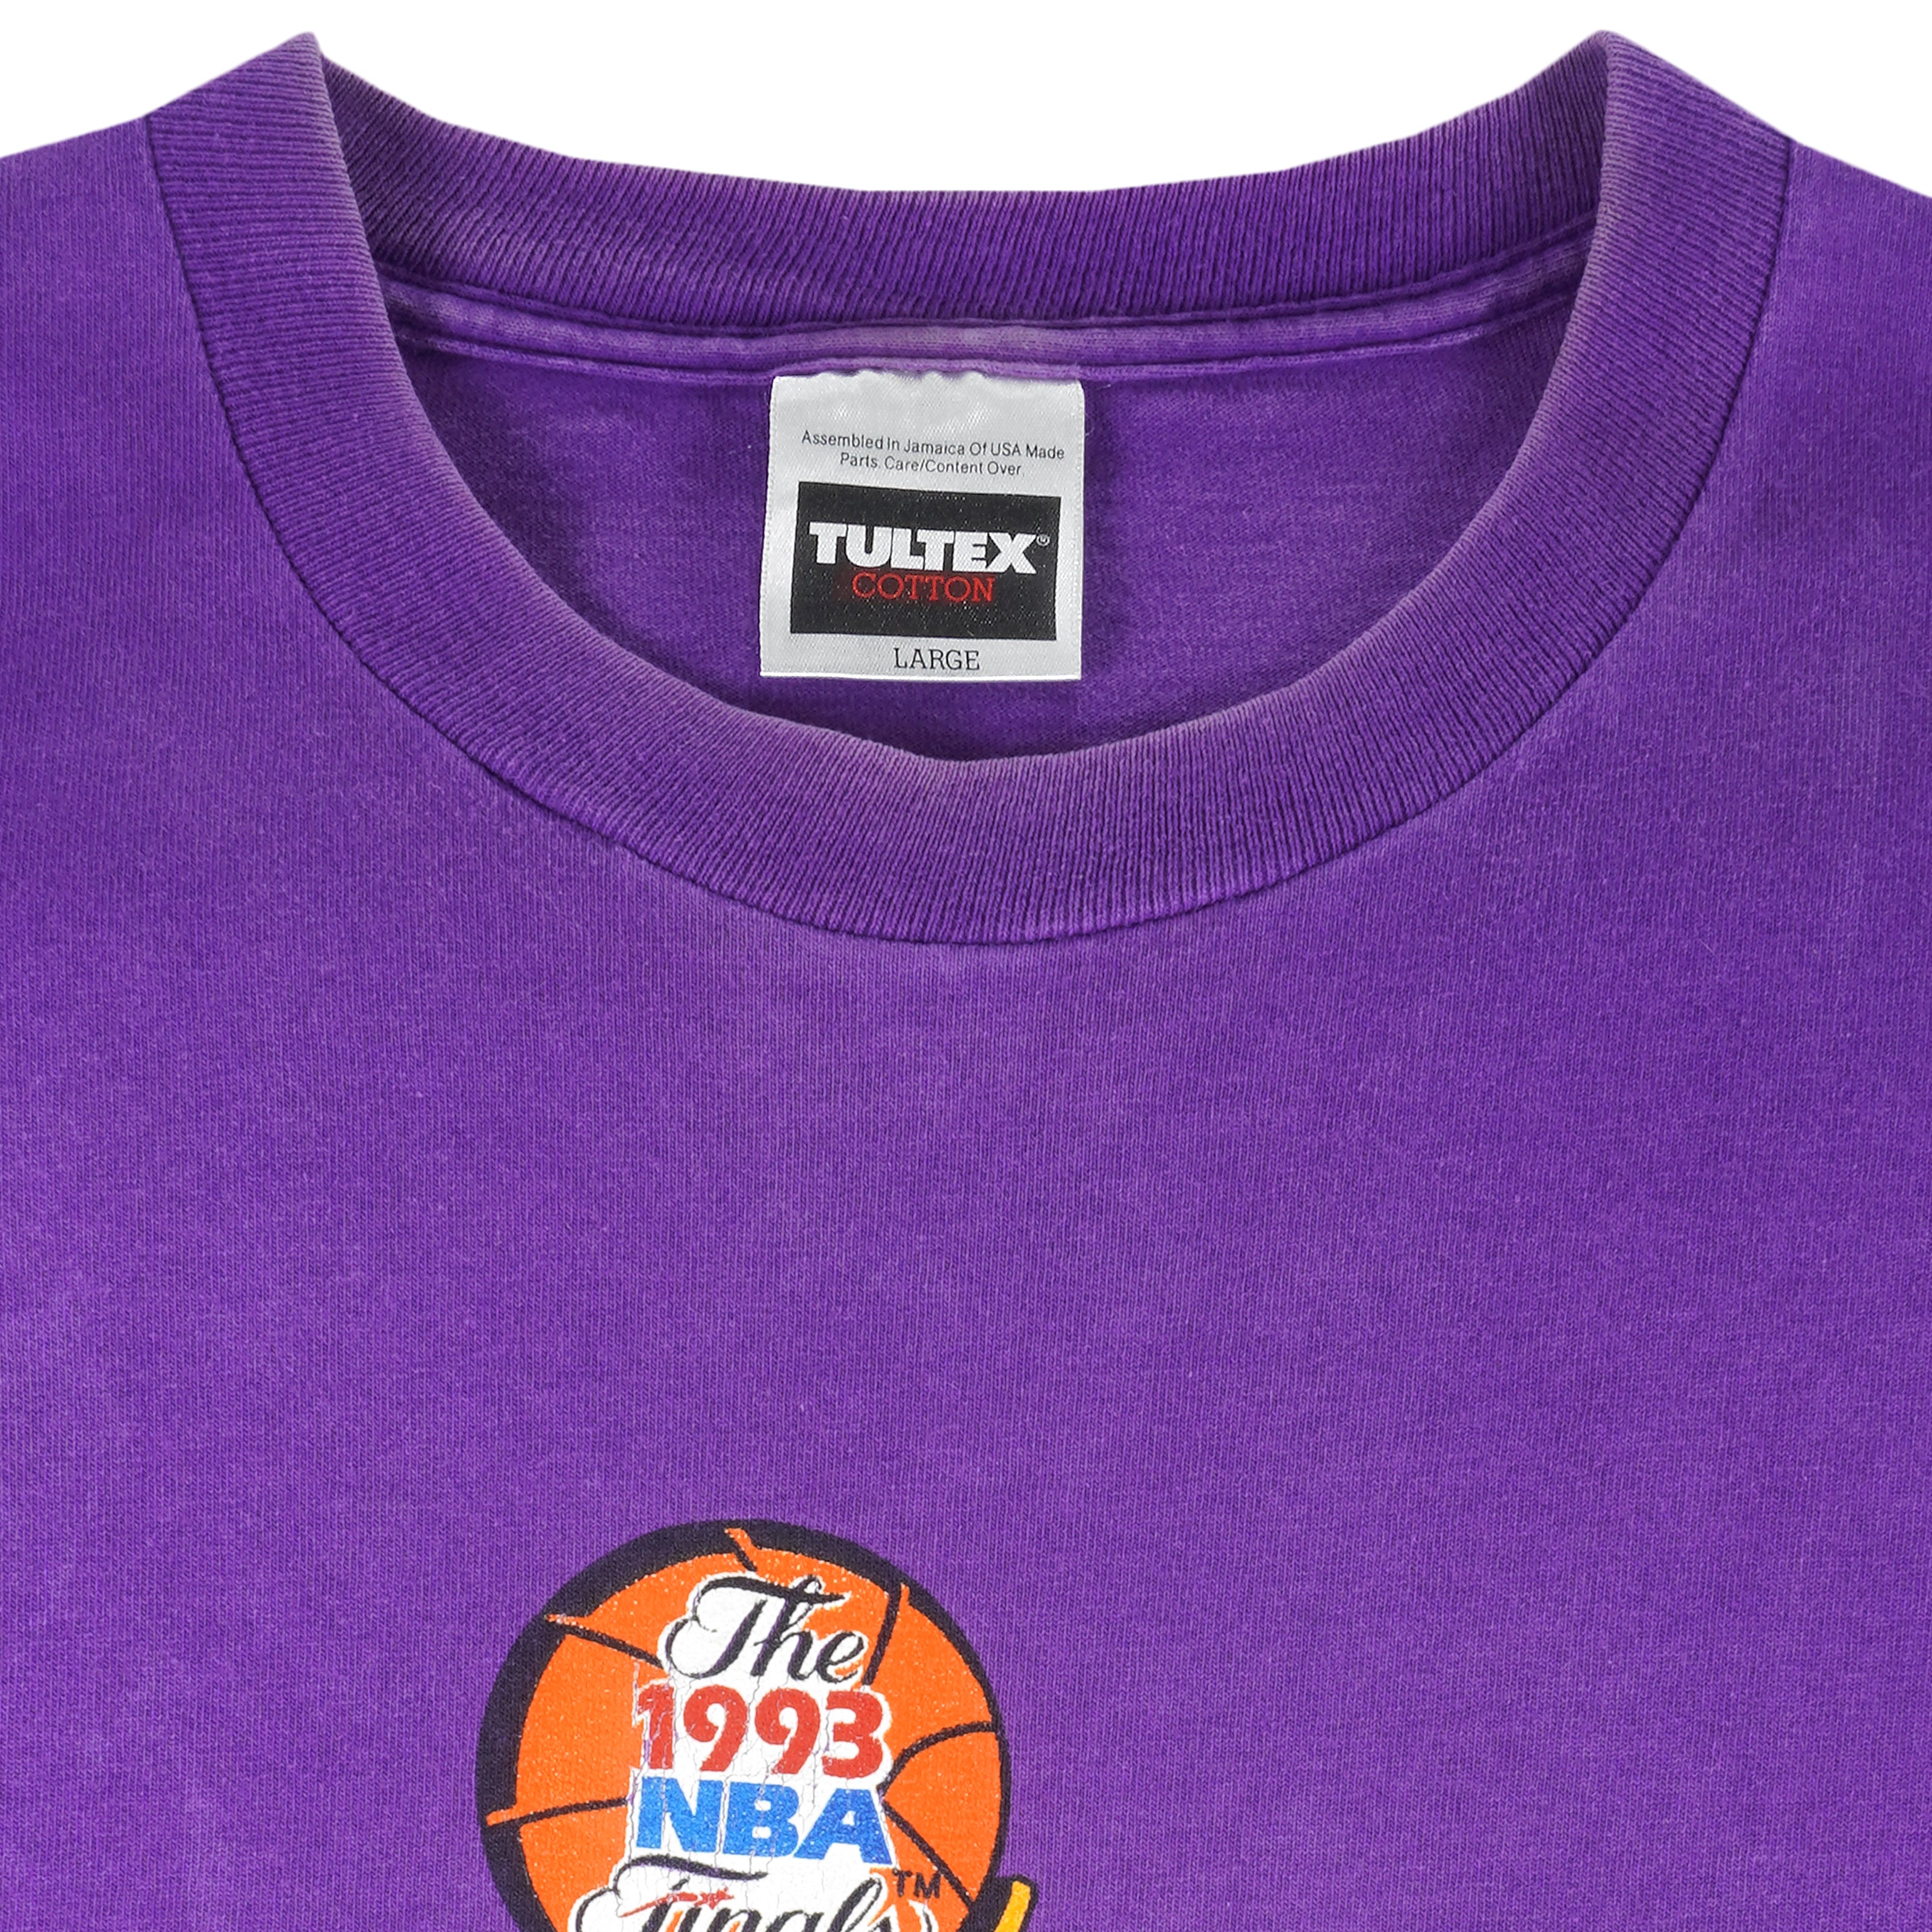 VINTAGE NBA PHOENIX SUNS CHAMPIONS 1993 TEE SHIRT SIZE XL MADE IN